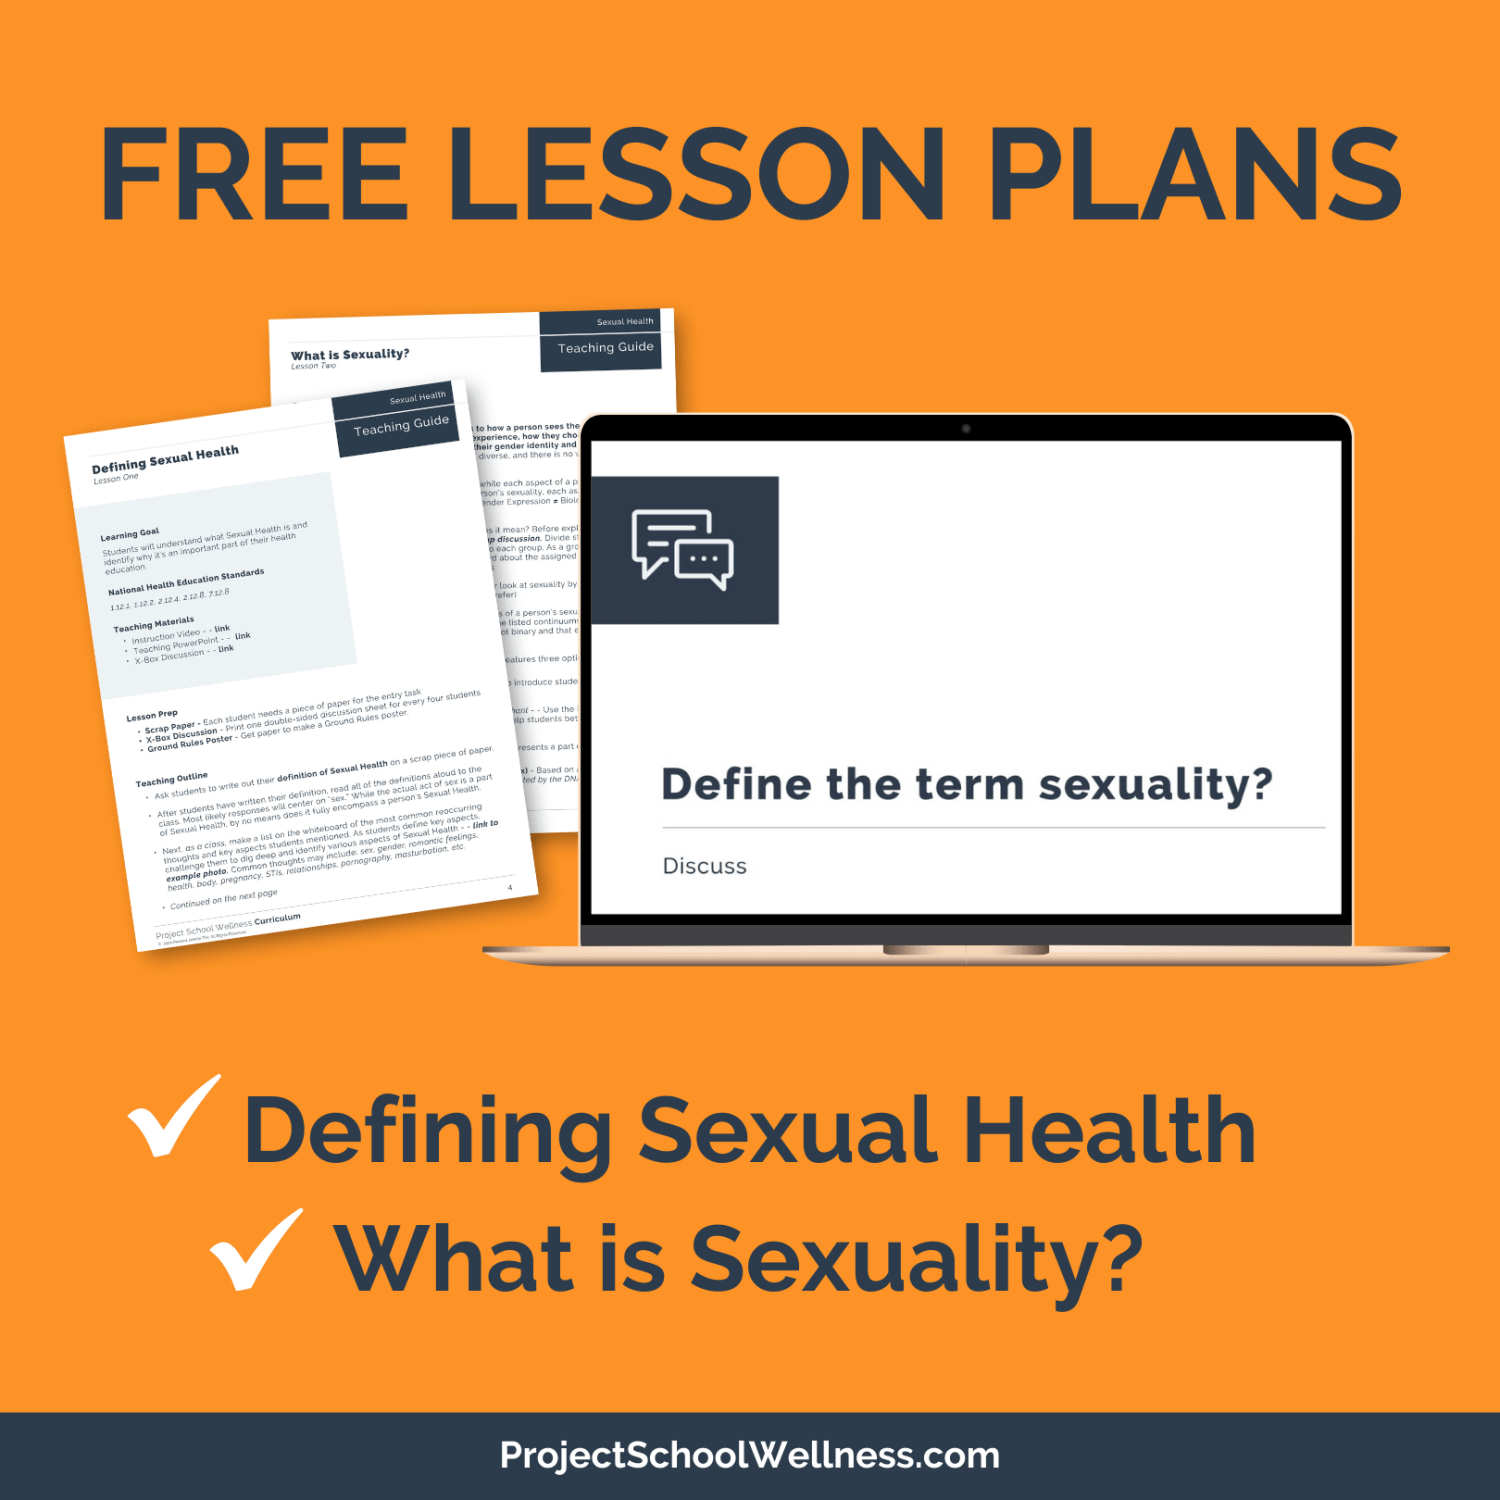 Free sex ed lesson plans. A lesson plan defining the term sexual health and sharing a holistic definition. And a lesson plan exploring the definition of sexuality, sexual identity, and sexual orientation.